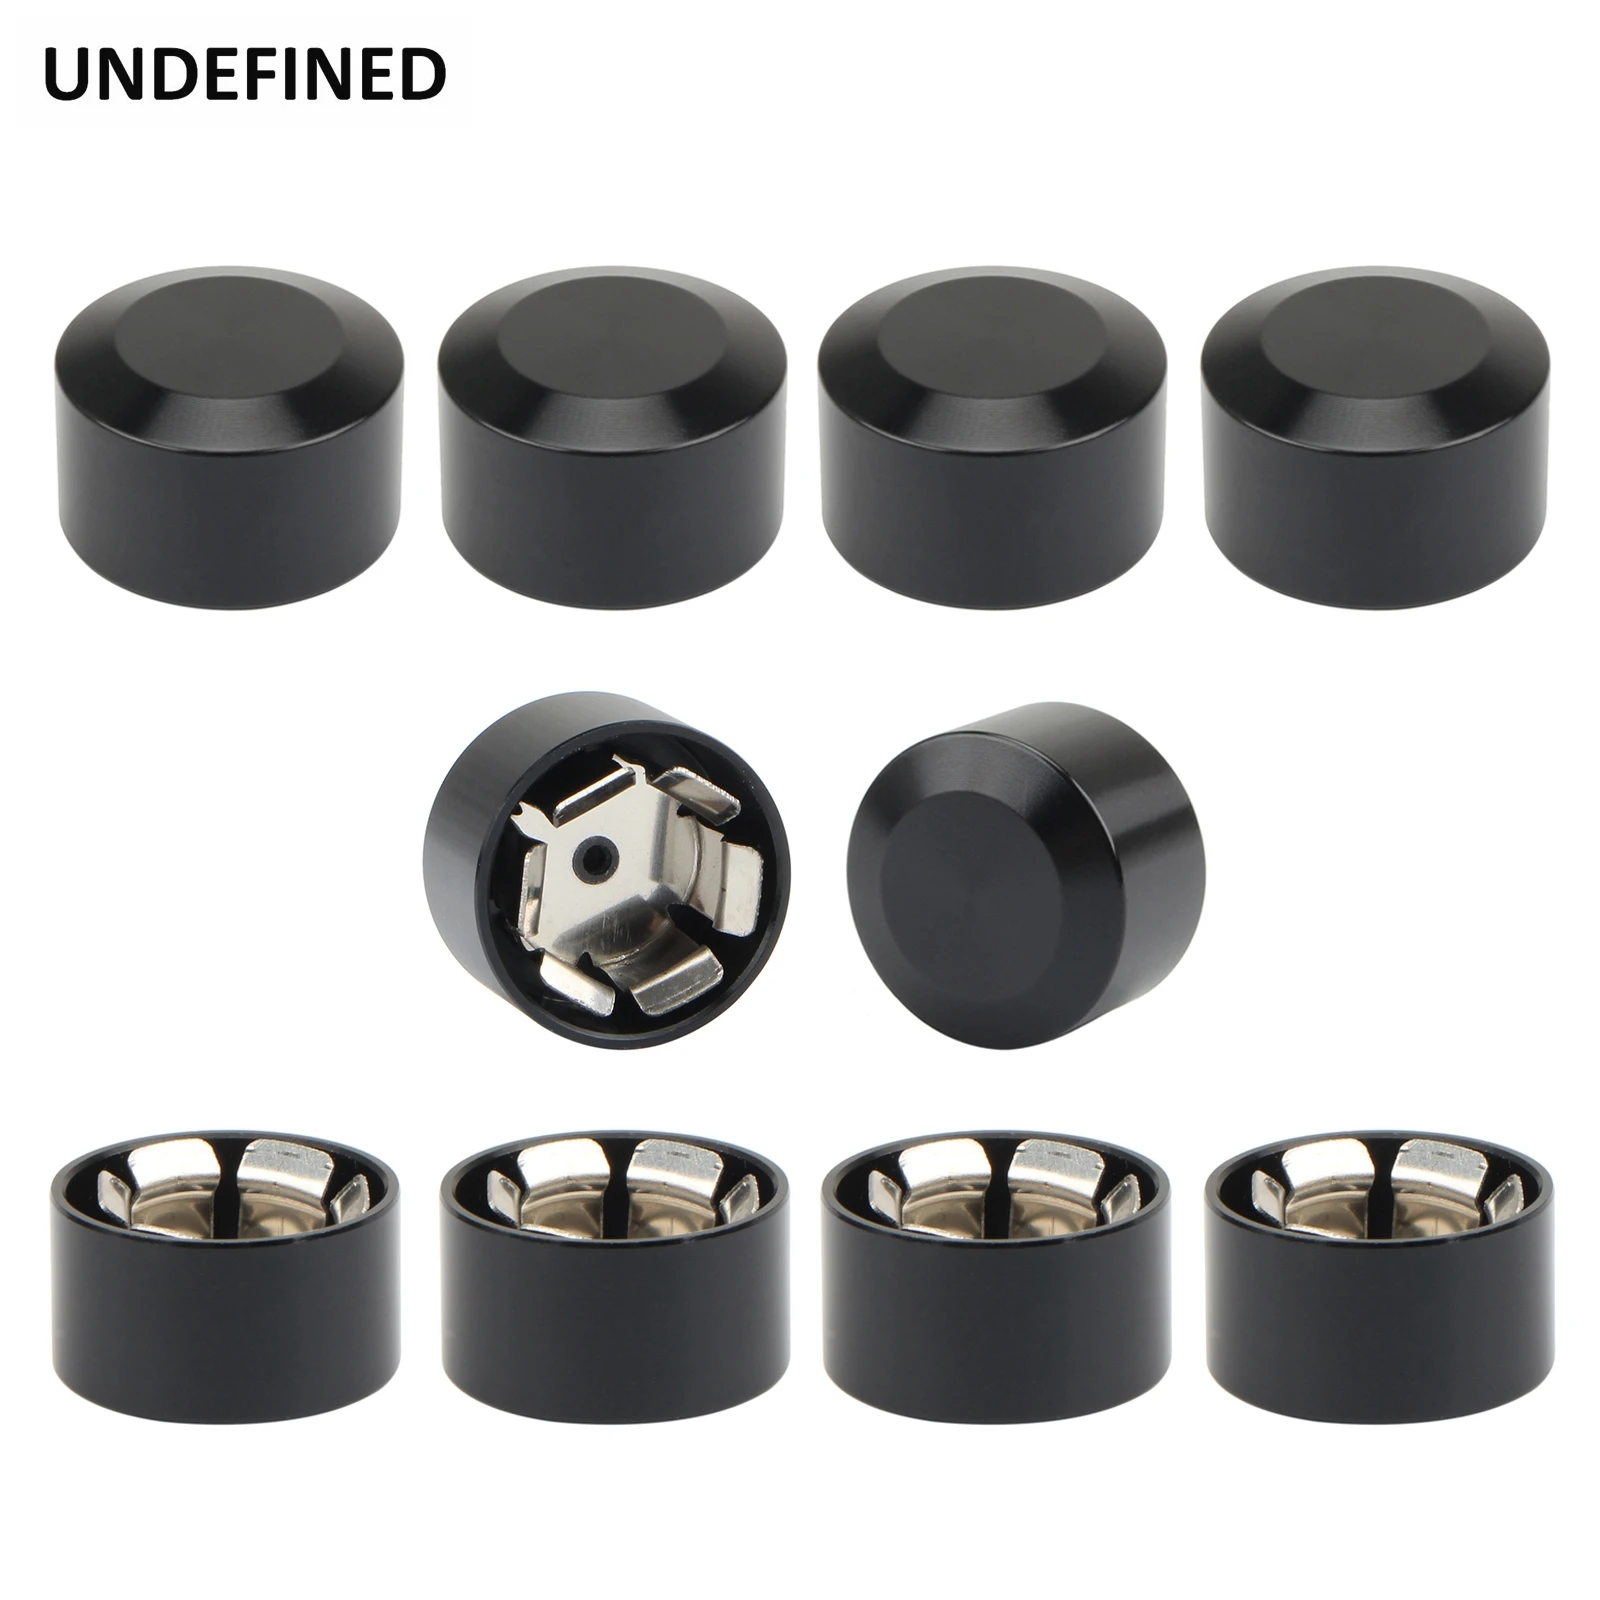 10pcs Motorcycle Bolt Head Caps Cover CNC Engine Topper Bolts Covers 7.5-10mm For Harley Twin Cam Dyna Softail Touring Road King